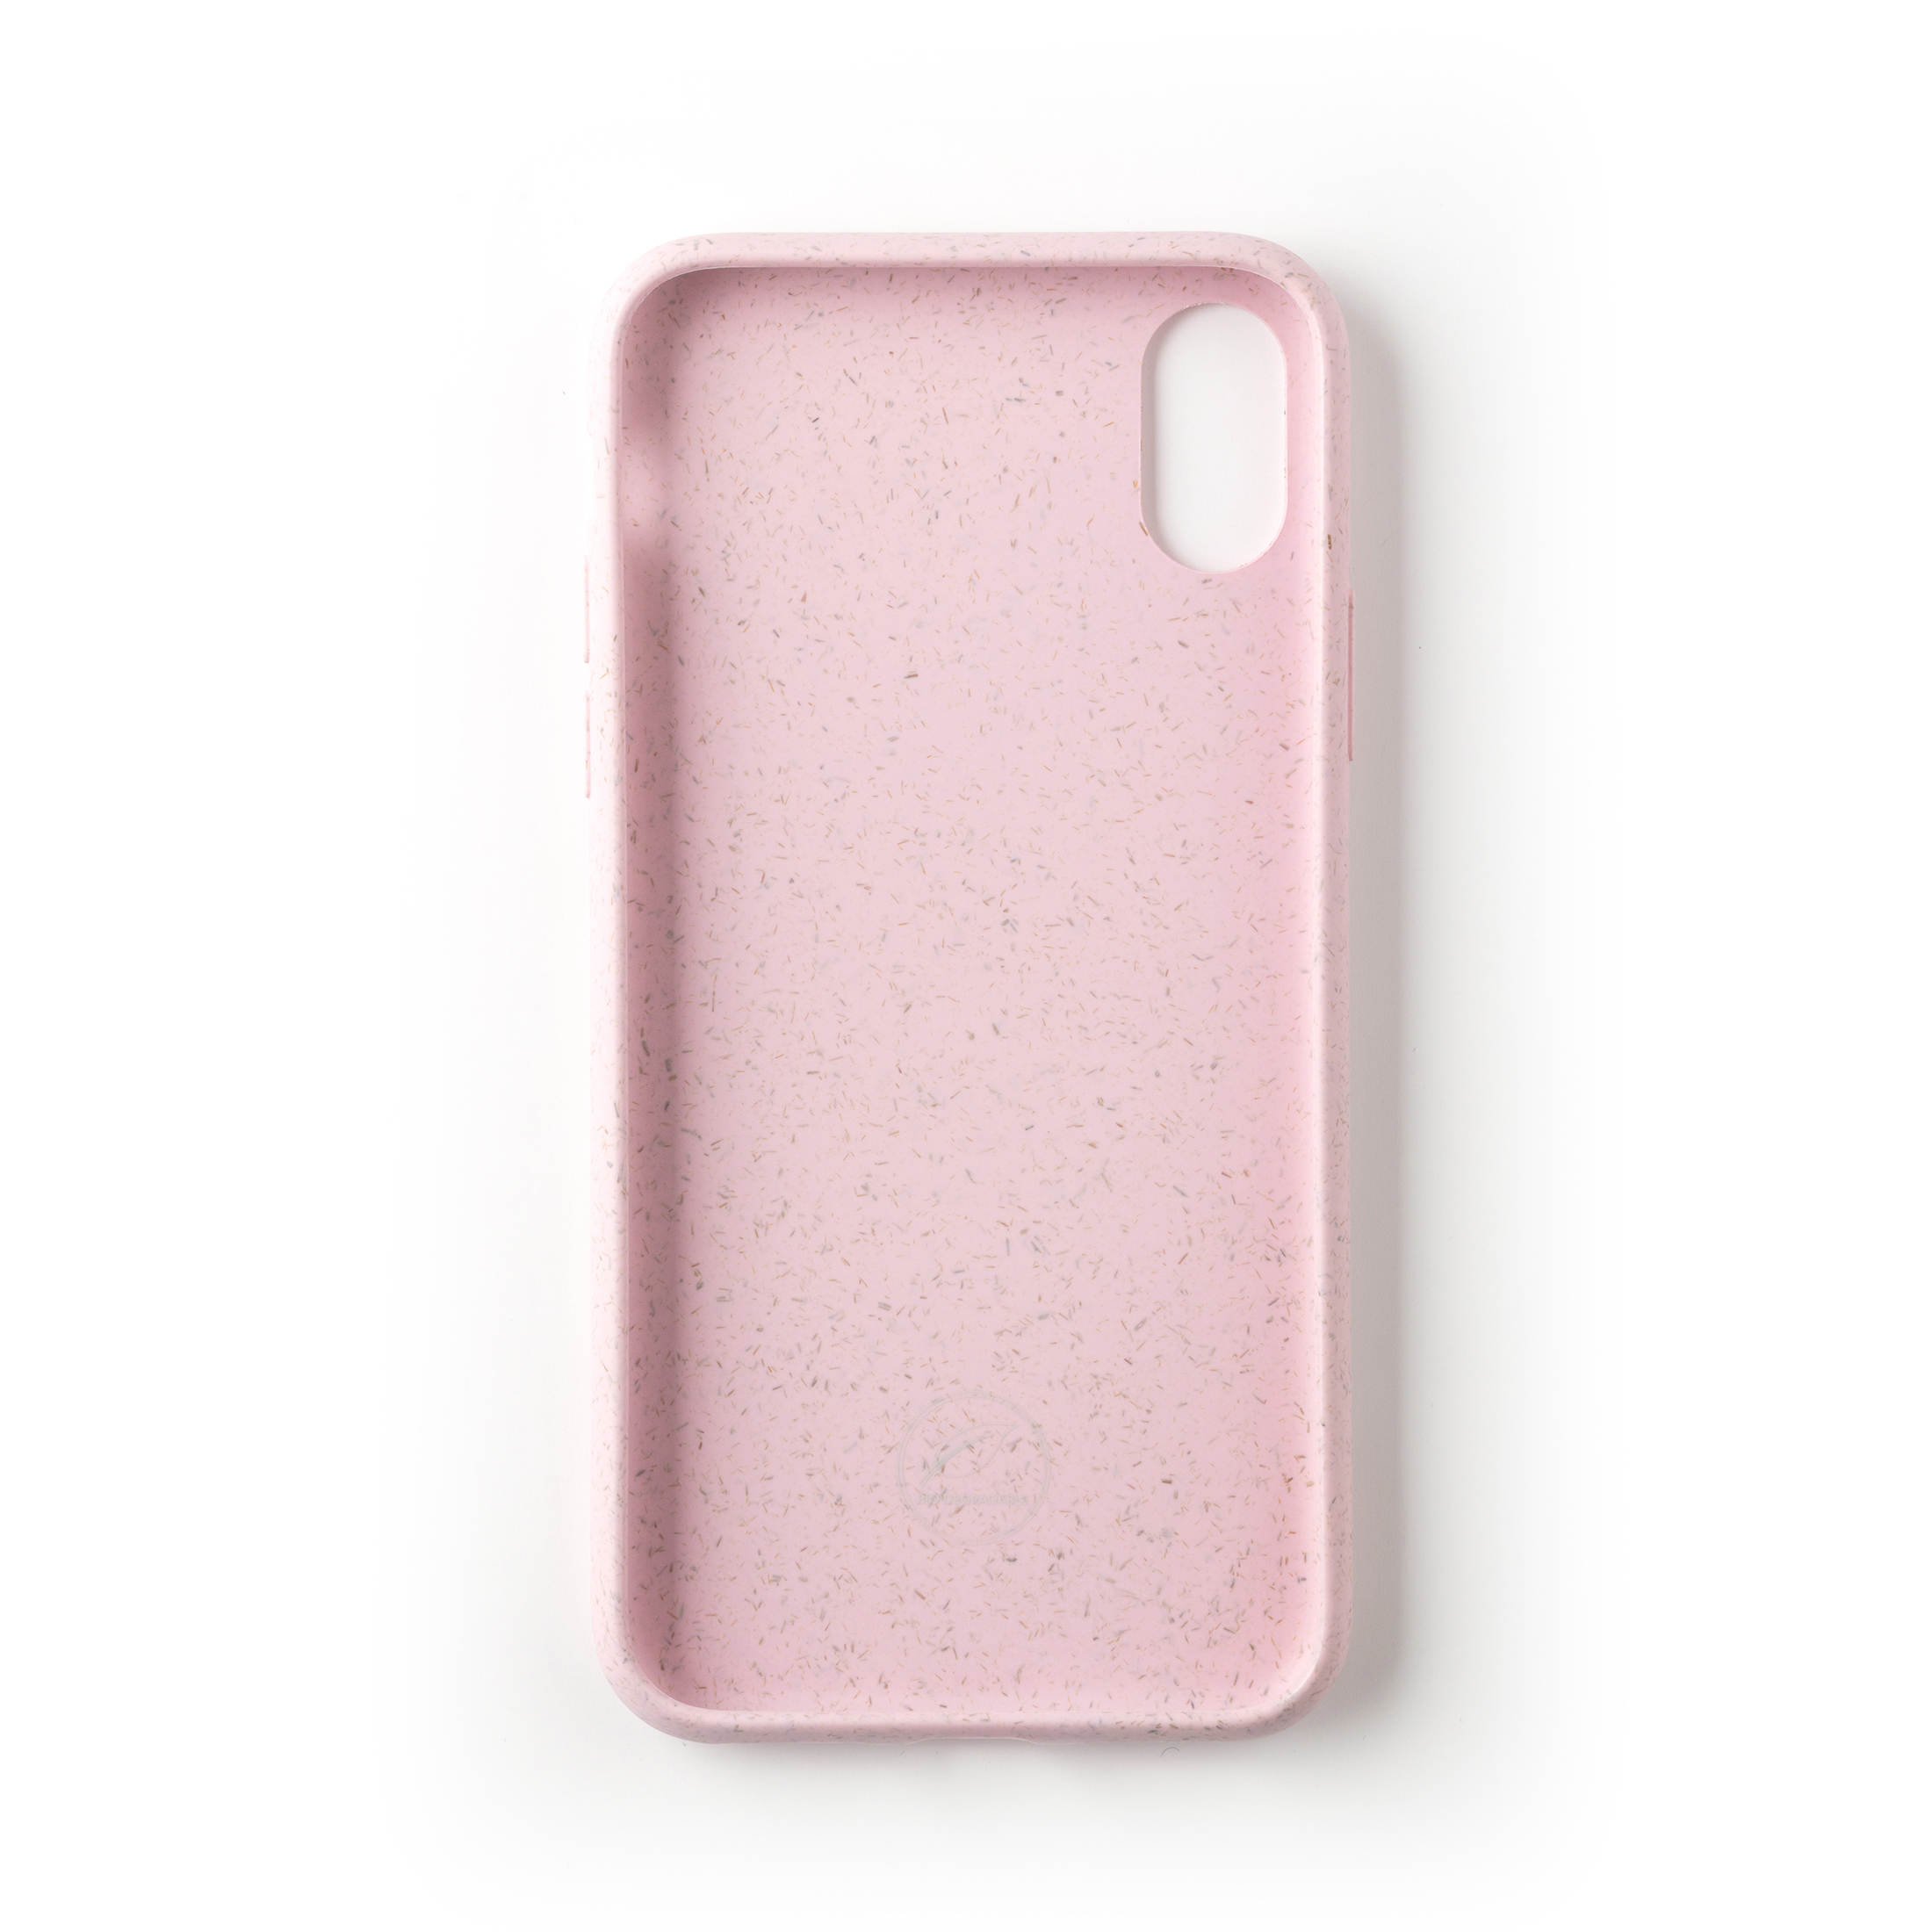 RIPXR, WILMA FASHION ECO Apple, iPhone XR, Backcover, pink BY